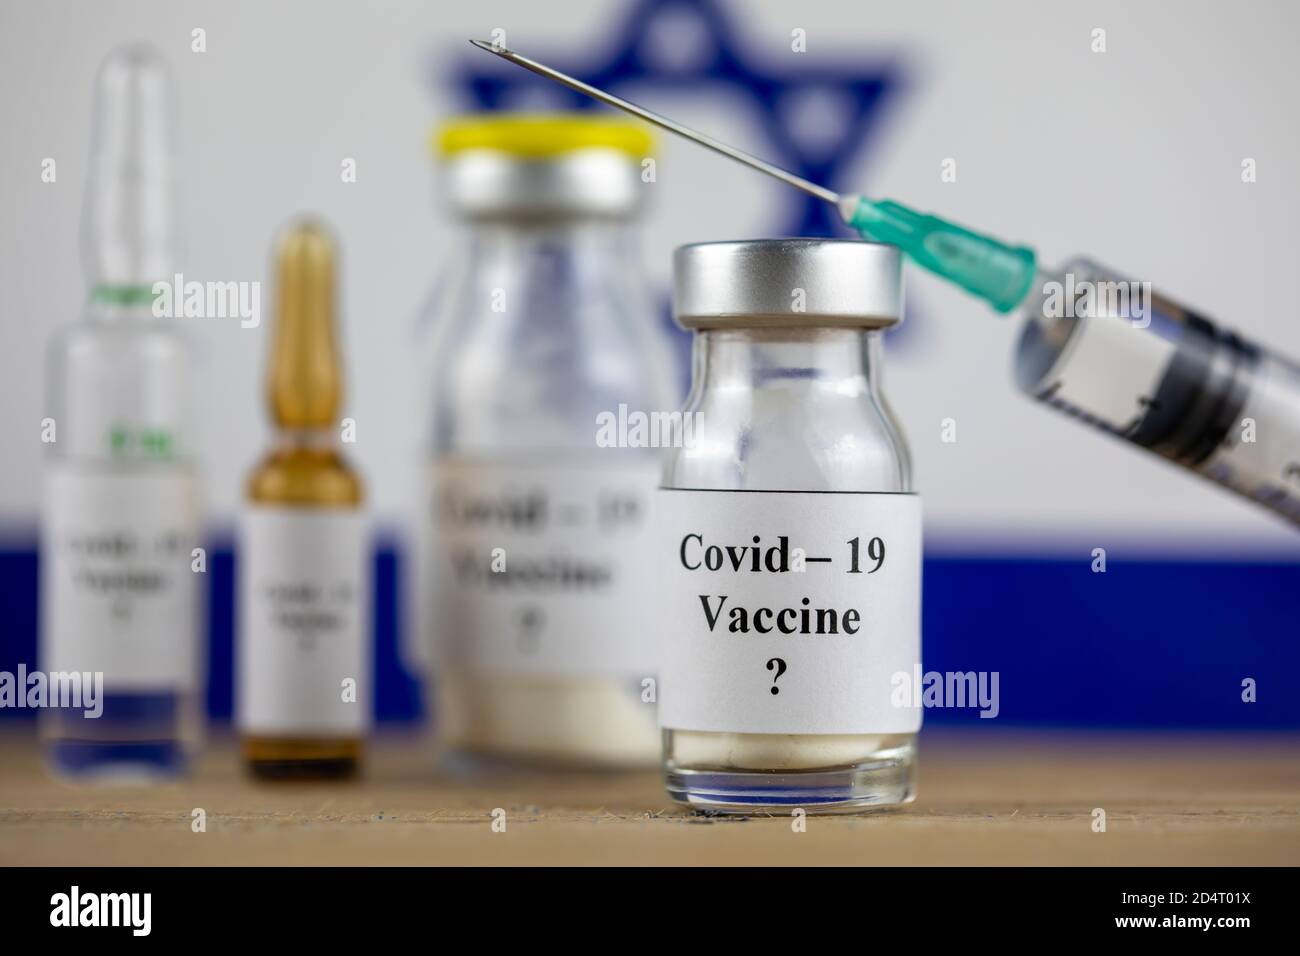 Israel Flag and bottle with vaccine and seringue, coronavirus, Covid-19, Medicine, science and Healthcare concept Banque D'Images